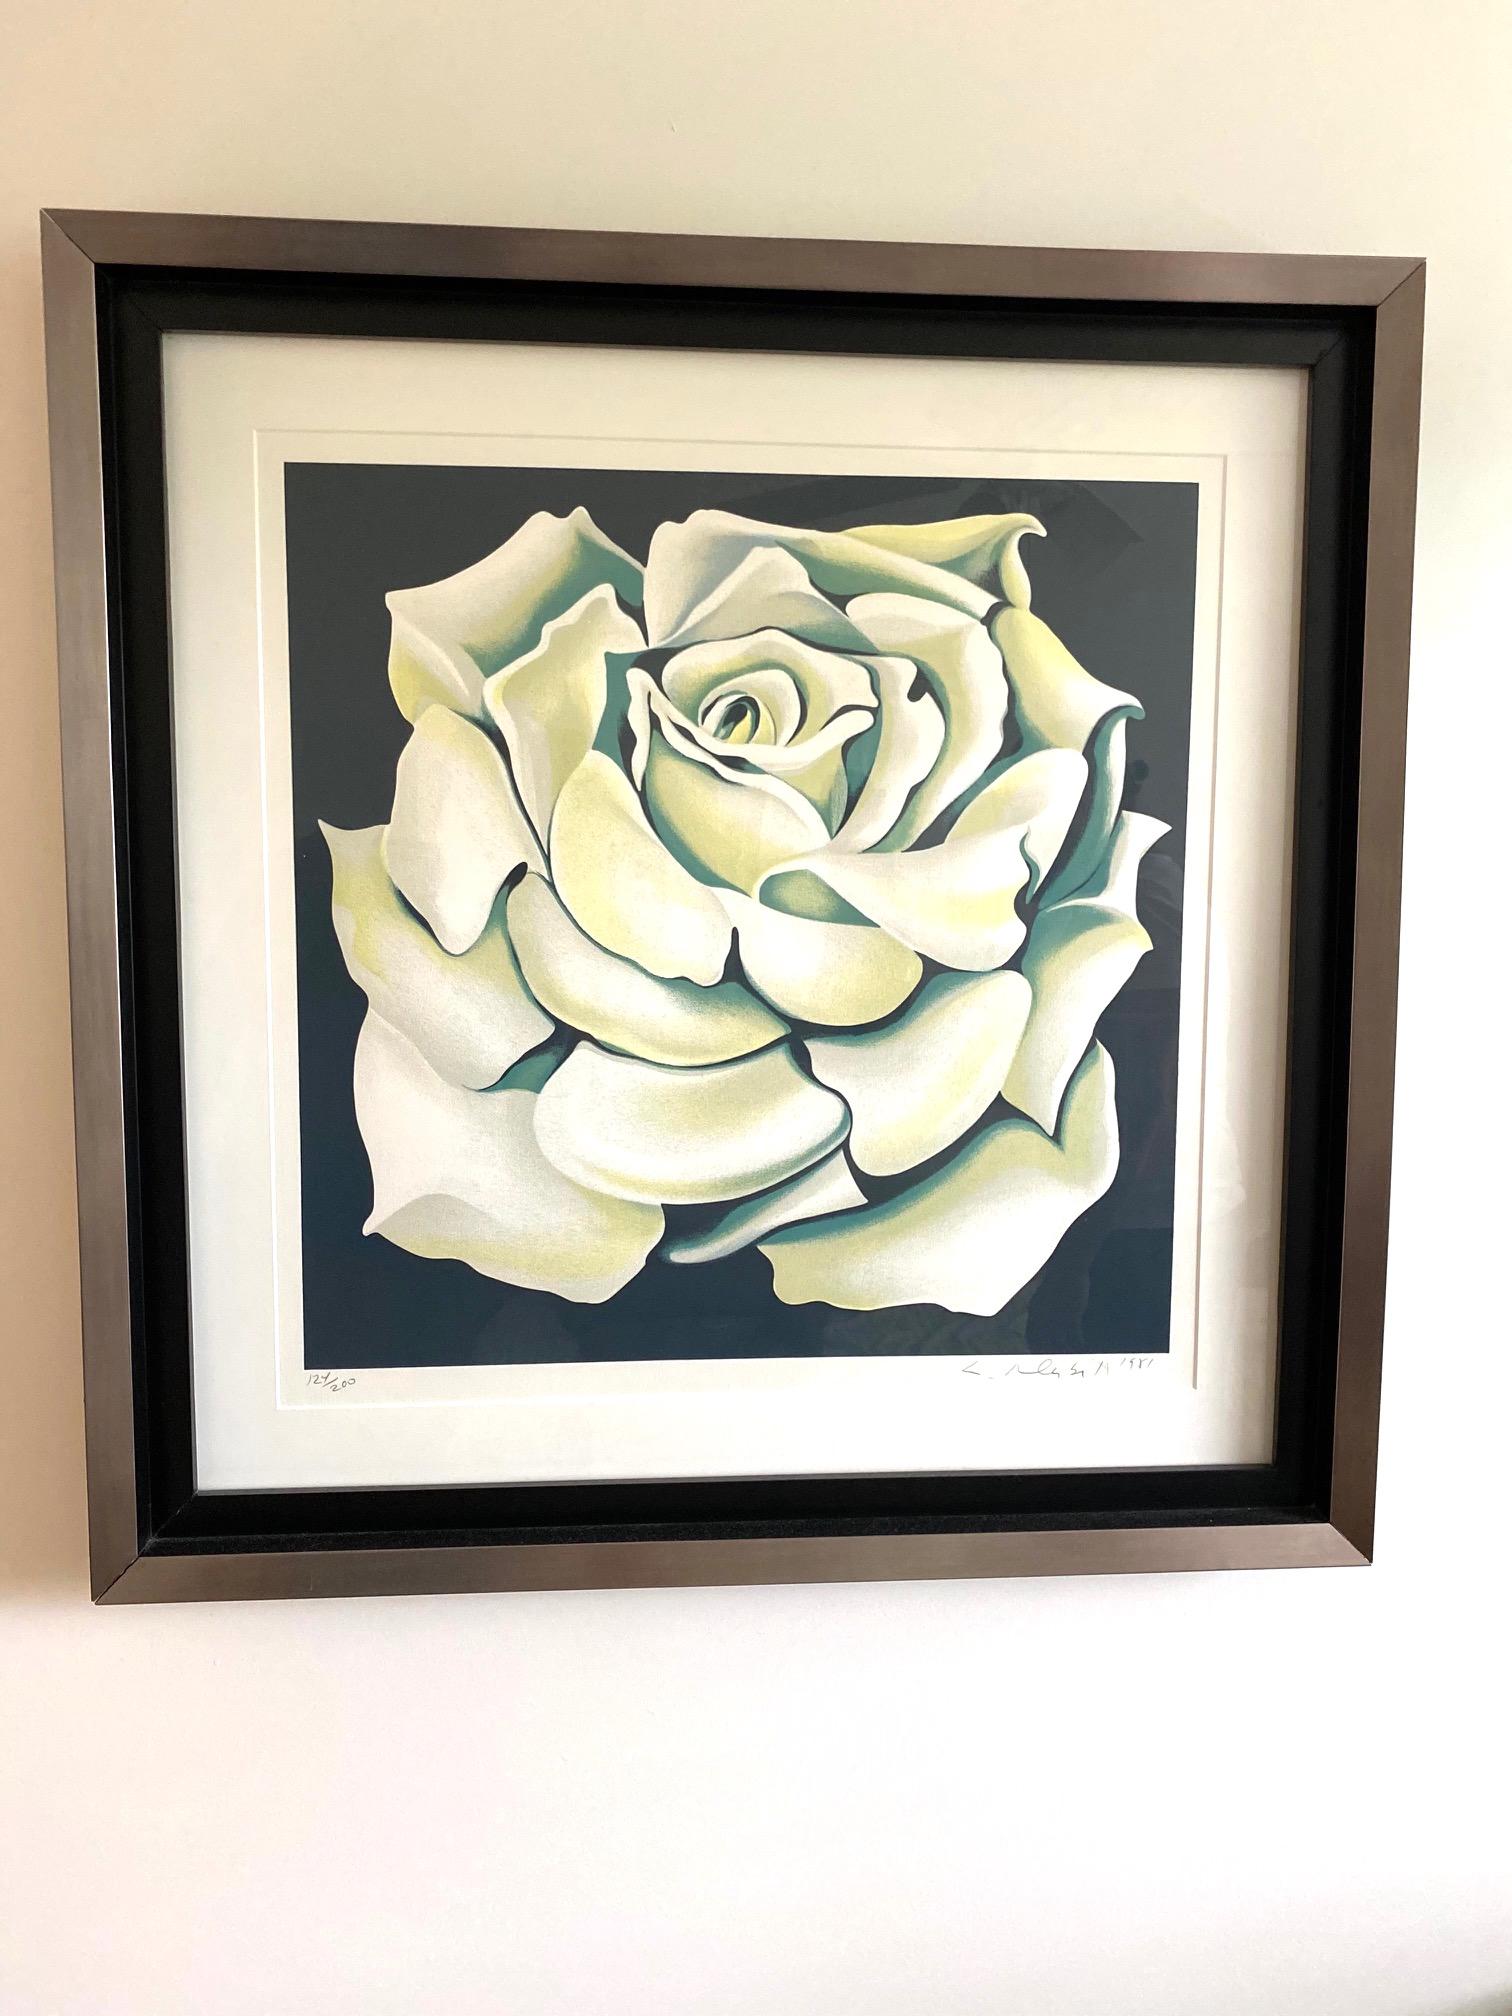 Lowell Nesbitt (1933-1993)
White Rose, circa 1981
Limited edition # 124 / 200
Artist-signed and numbered
Measures: 34.5